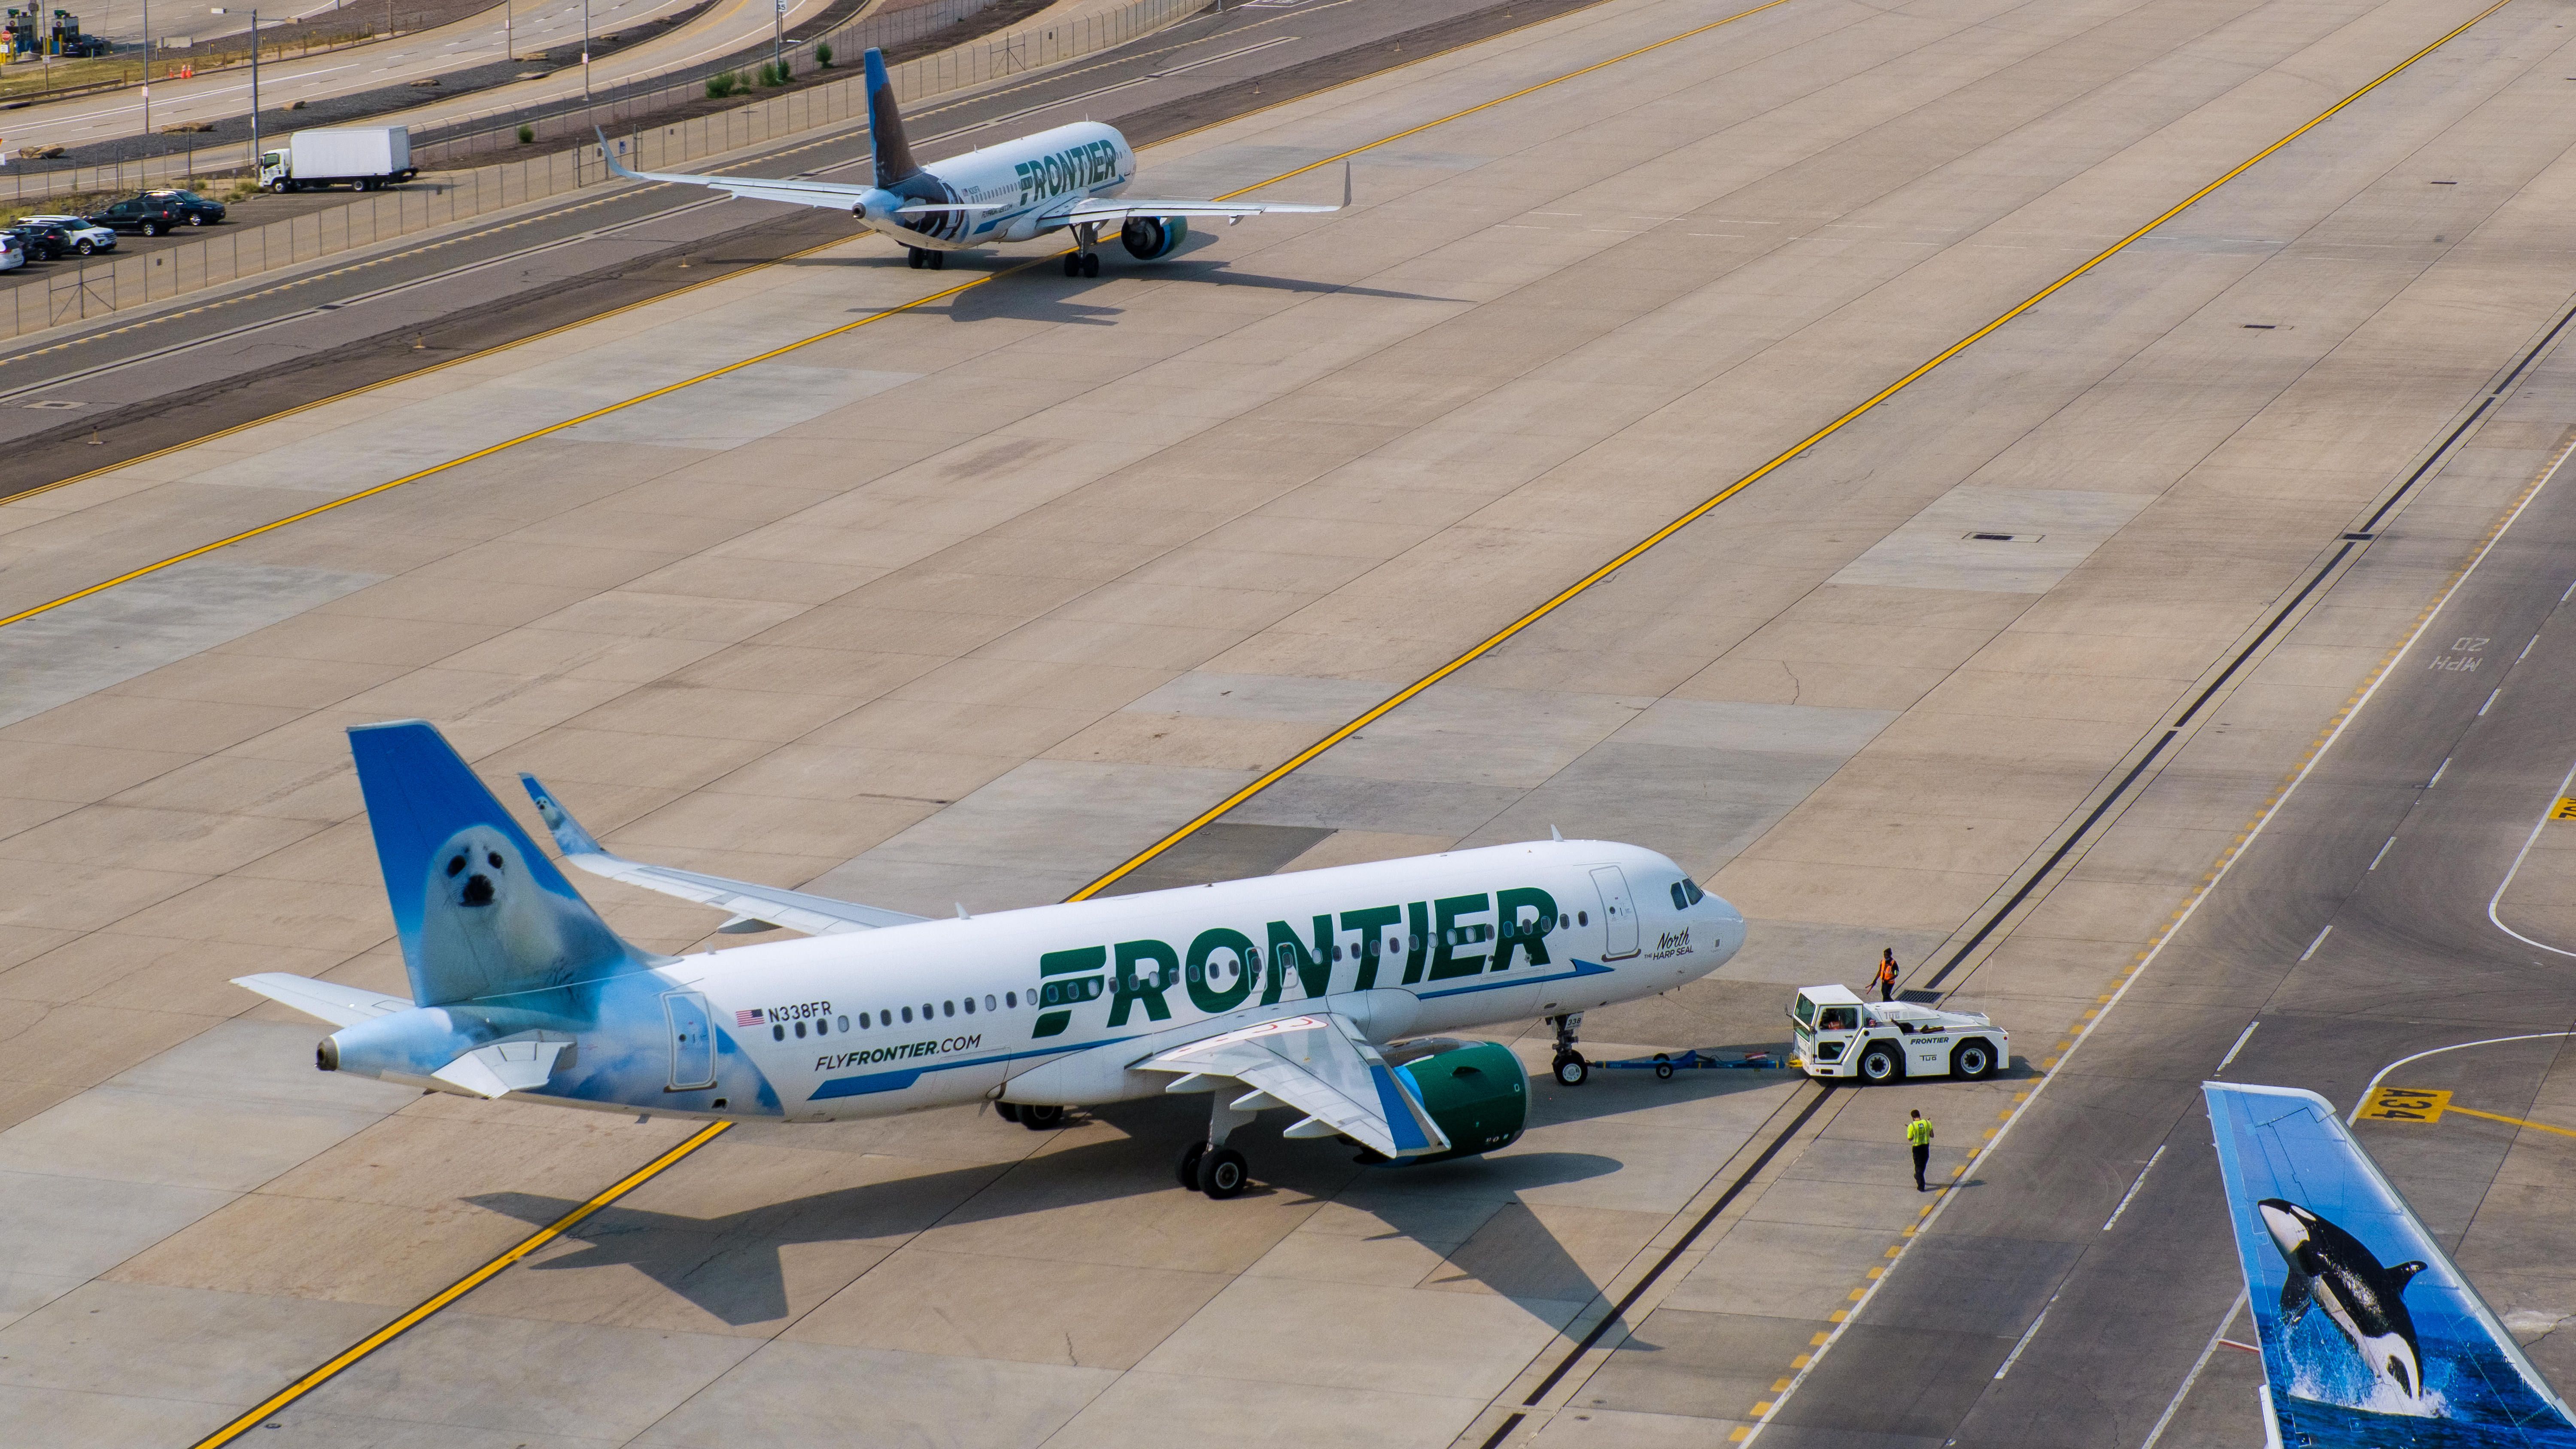 A Frontier Airlines aircraft at Denver Airport.